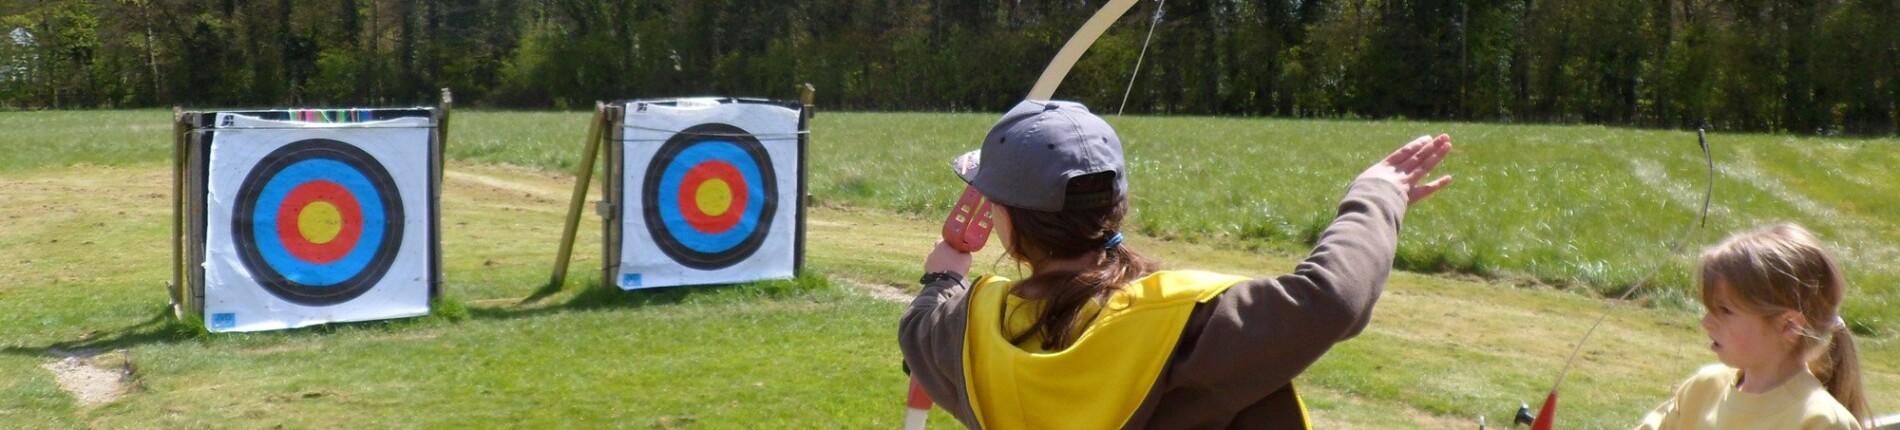 Brownies doing archery